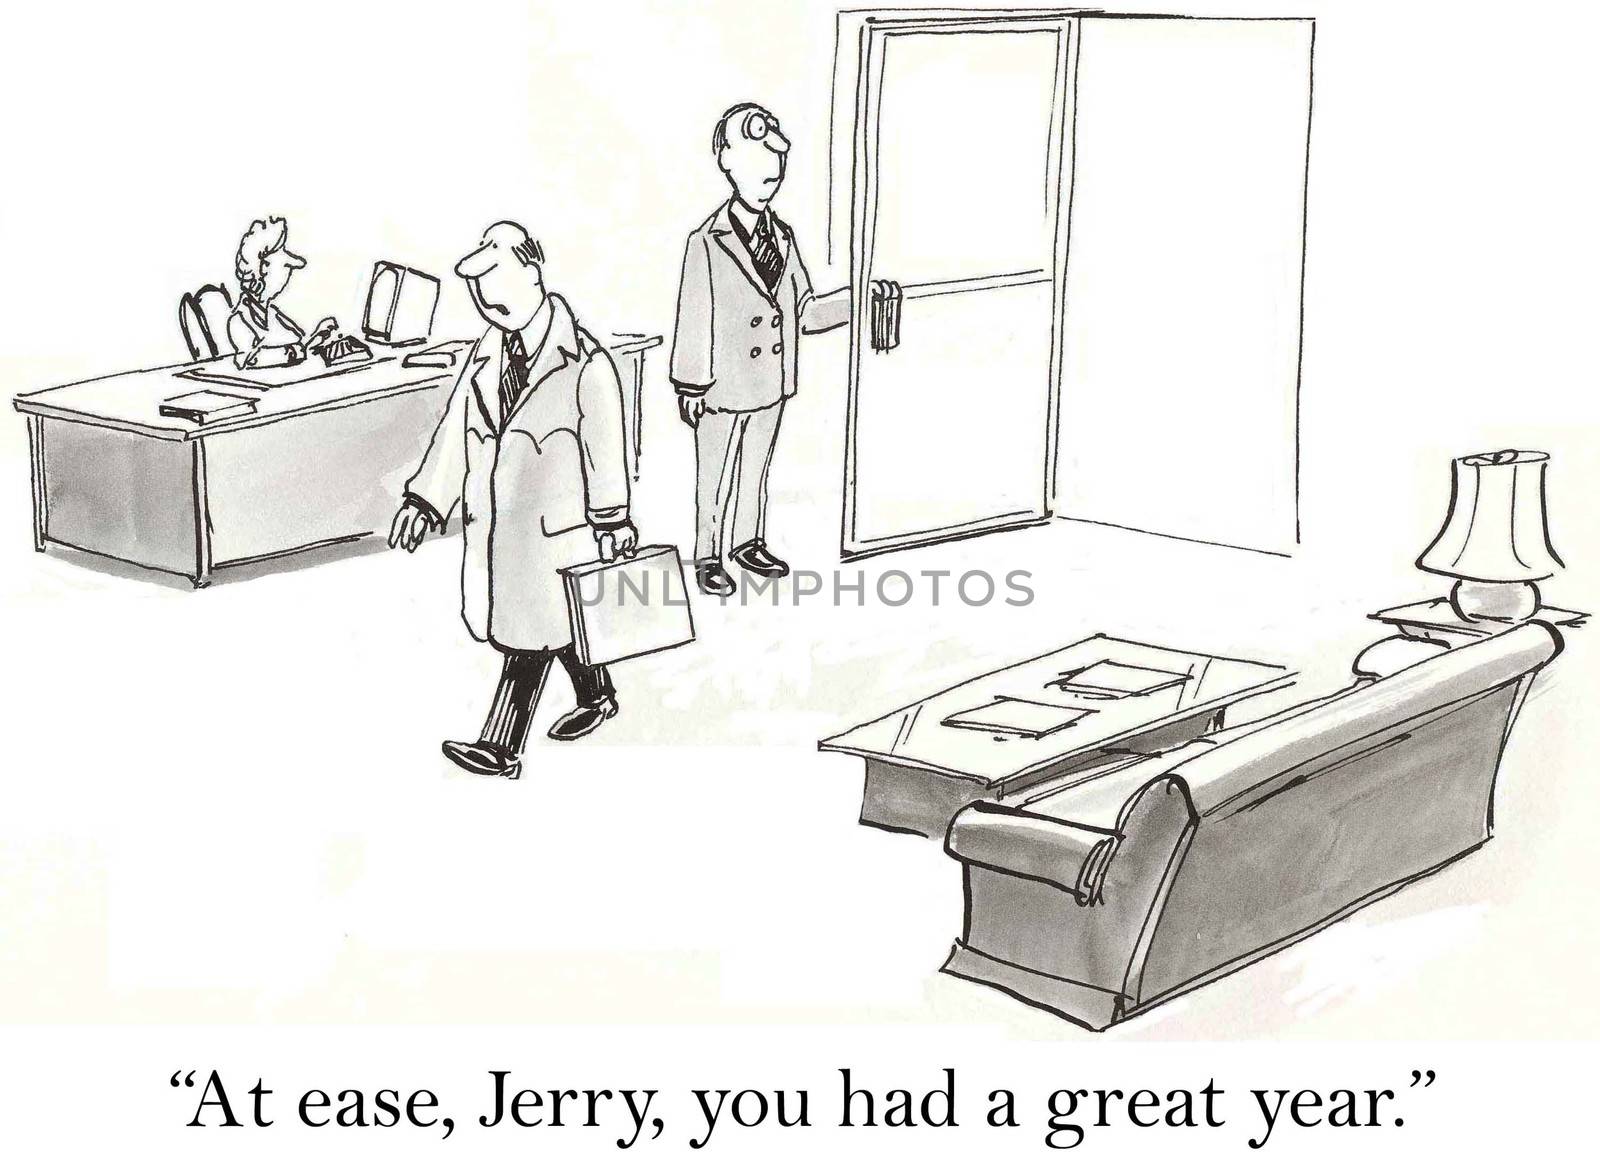 "At ease, Jerry, you had a great year."